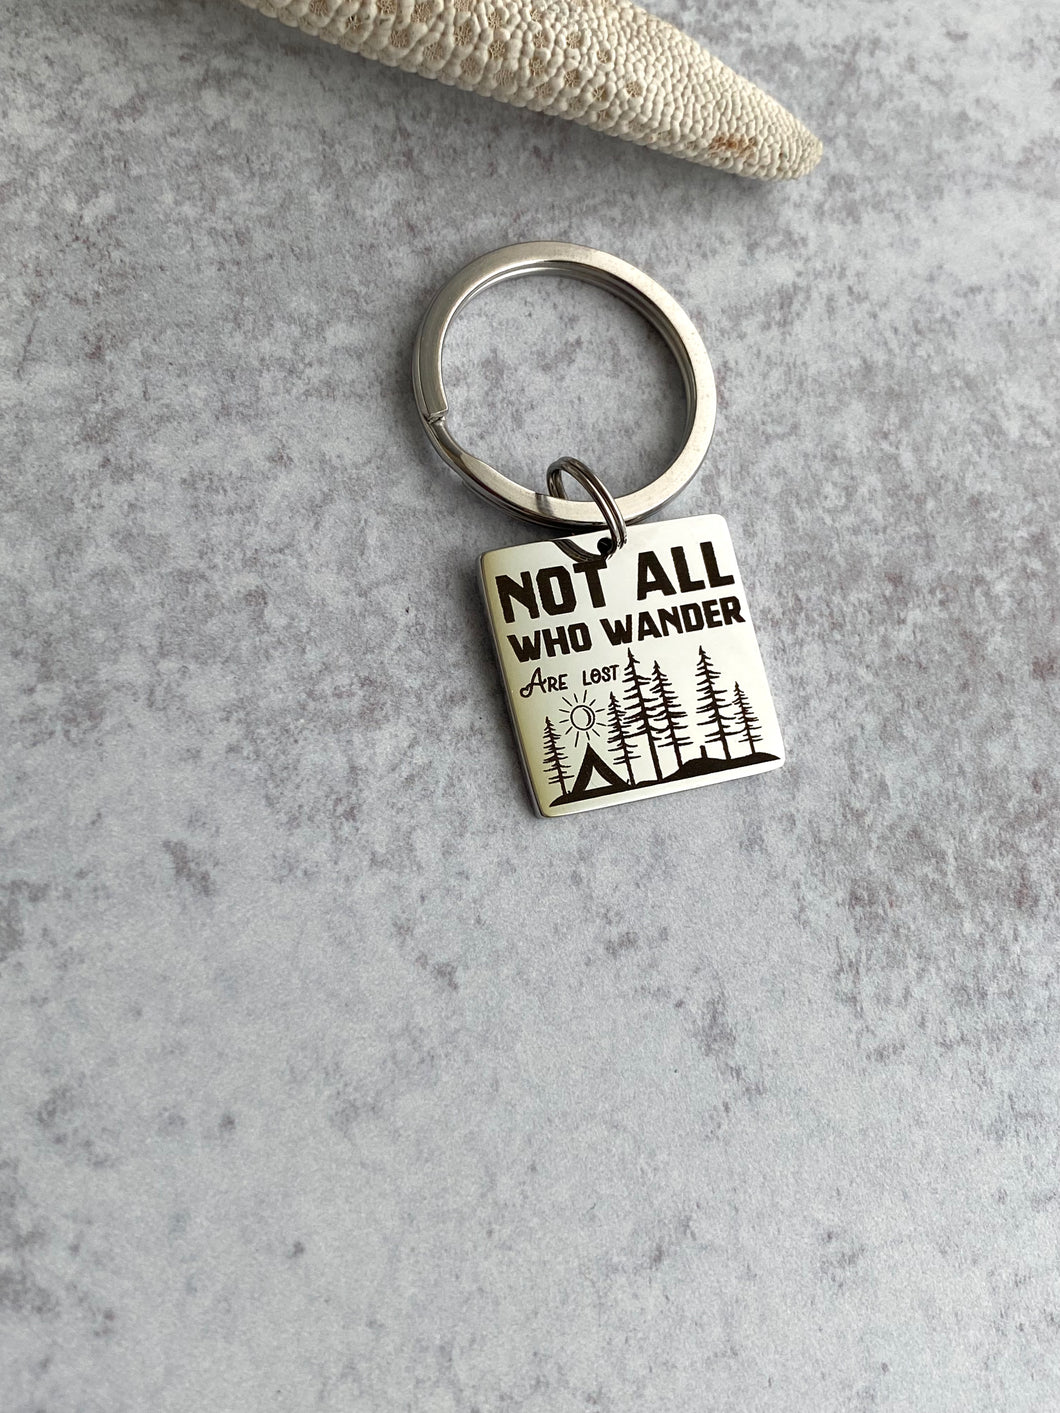 Not all who wander are lost keychain - stainless steel engraved key ring with trees and tent